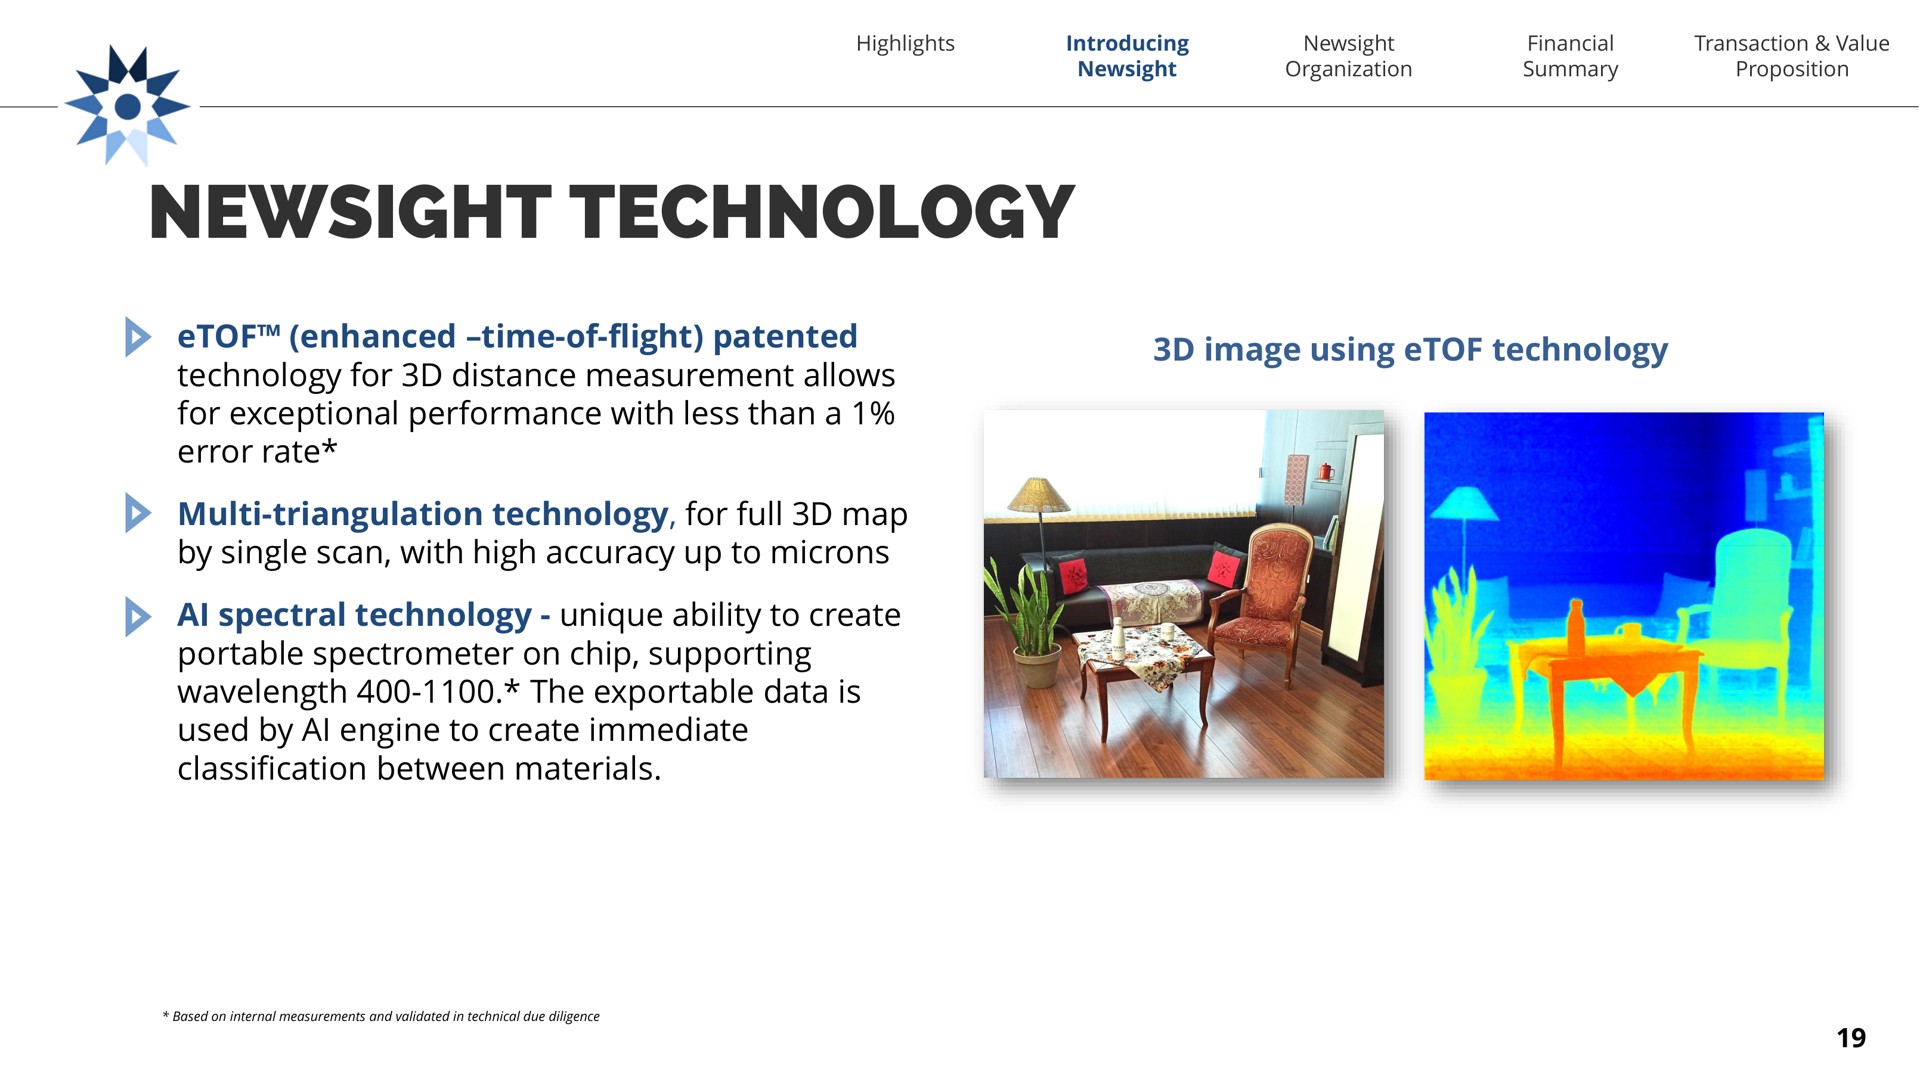 technology enhanced time of flight patented technology for distance measurement allows for exceptional performance with less than a error rate triangulation technology for full map by single scan with high accuracy up to microns spectral technology unique ability to create portable spectrometer on chip supporting the exportable data is used by engine to create immediate classification between materials image using technology time of flight | Newsight Imaging